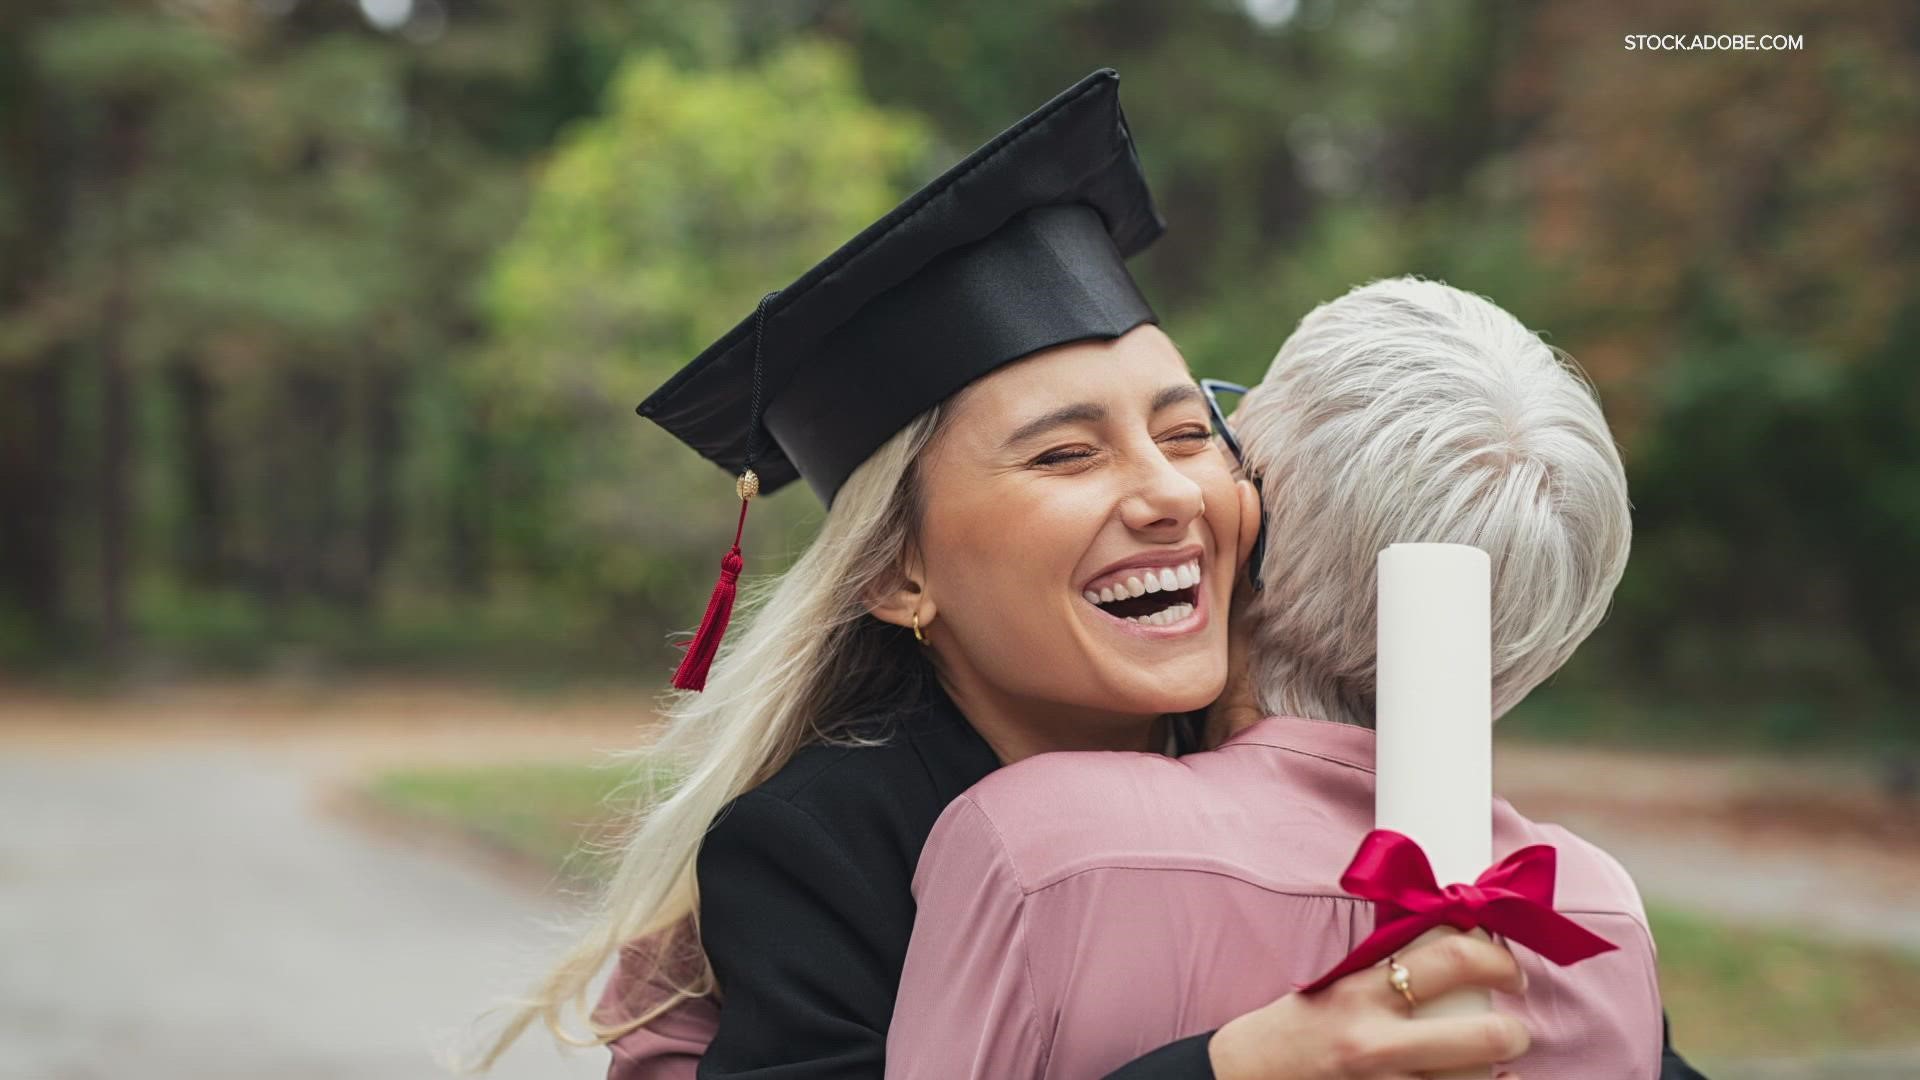 Graduation can be an expensive time of year for parents with gifts and celebrations.